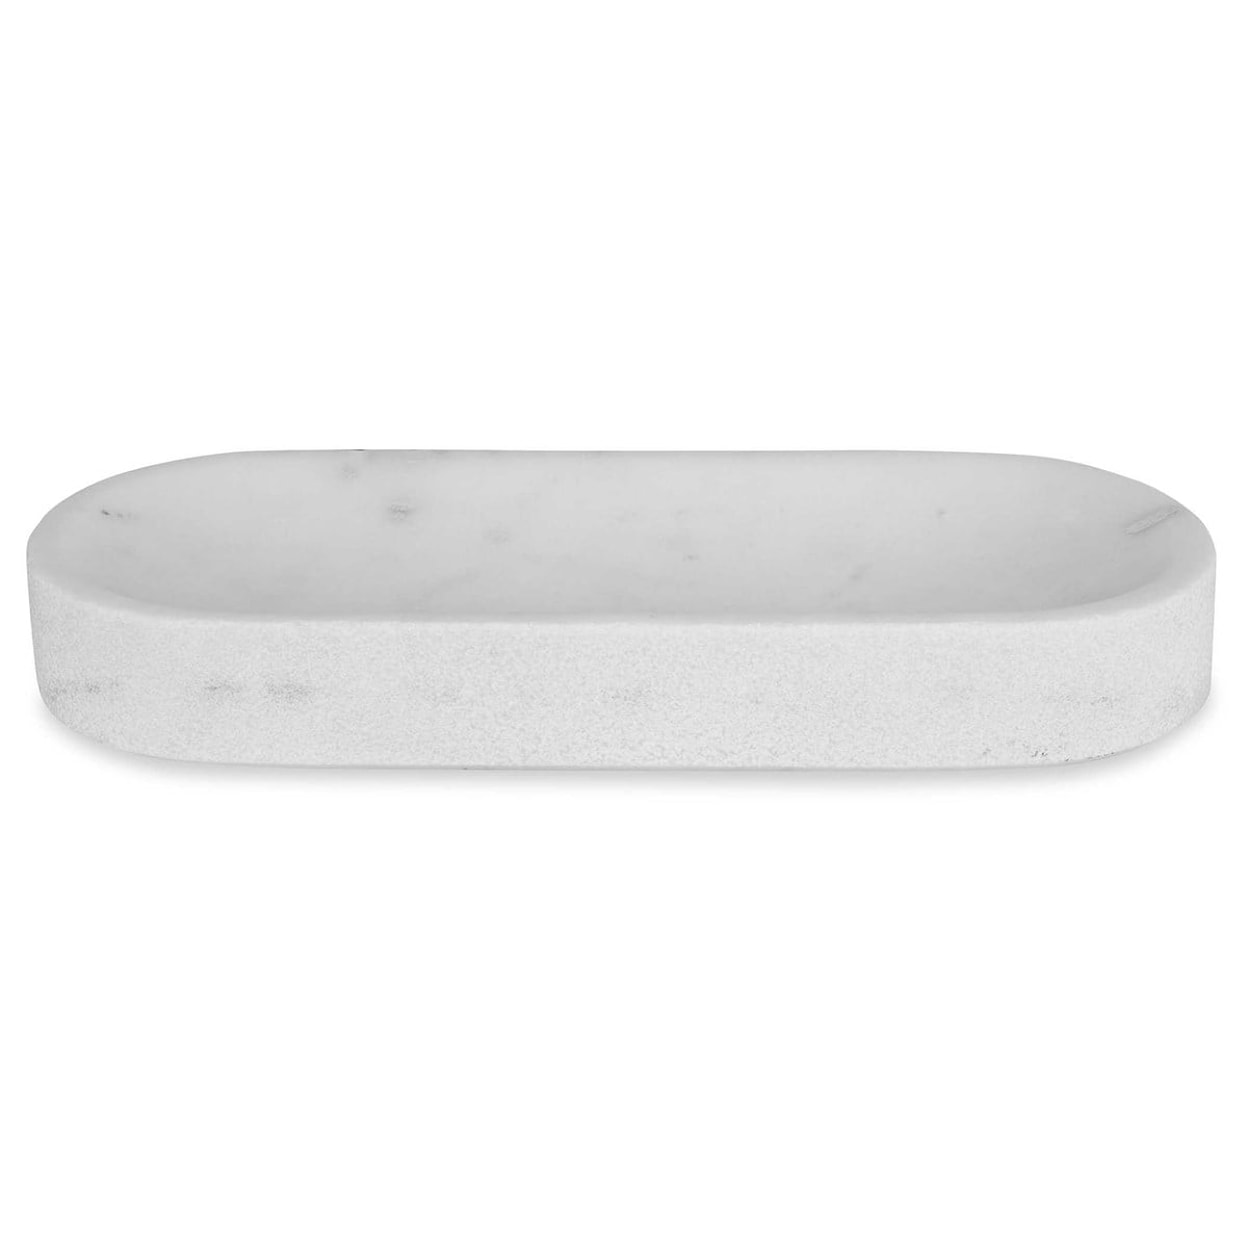 Uttermost Accessories BIG PILL BOWL/TRAY - WHITE MARBLE